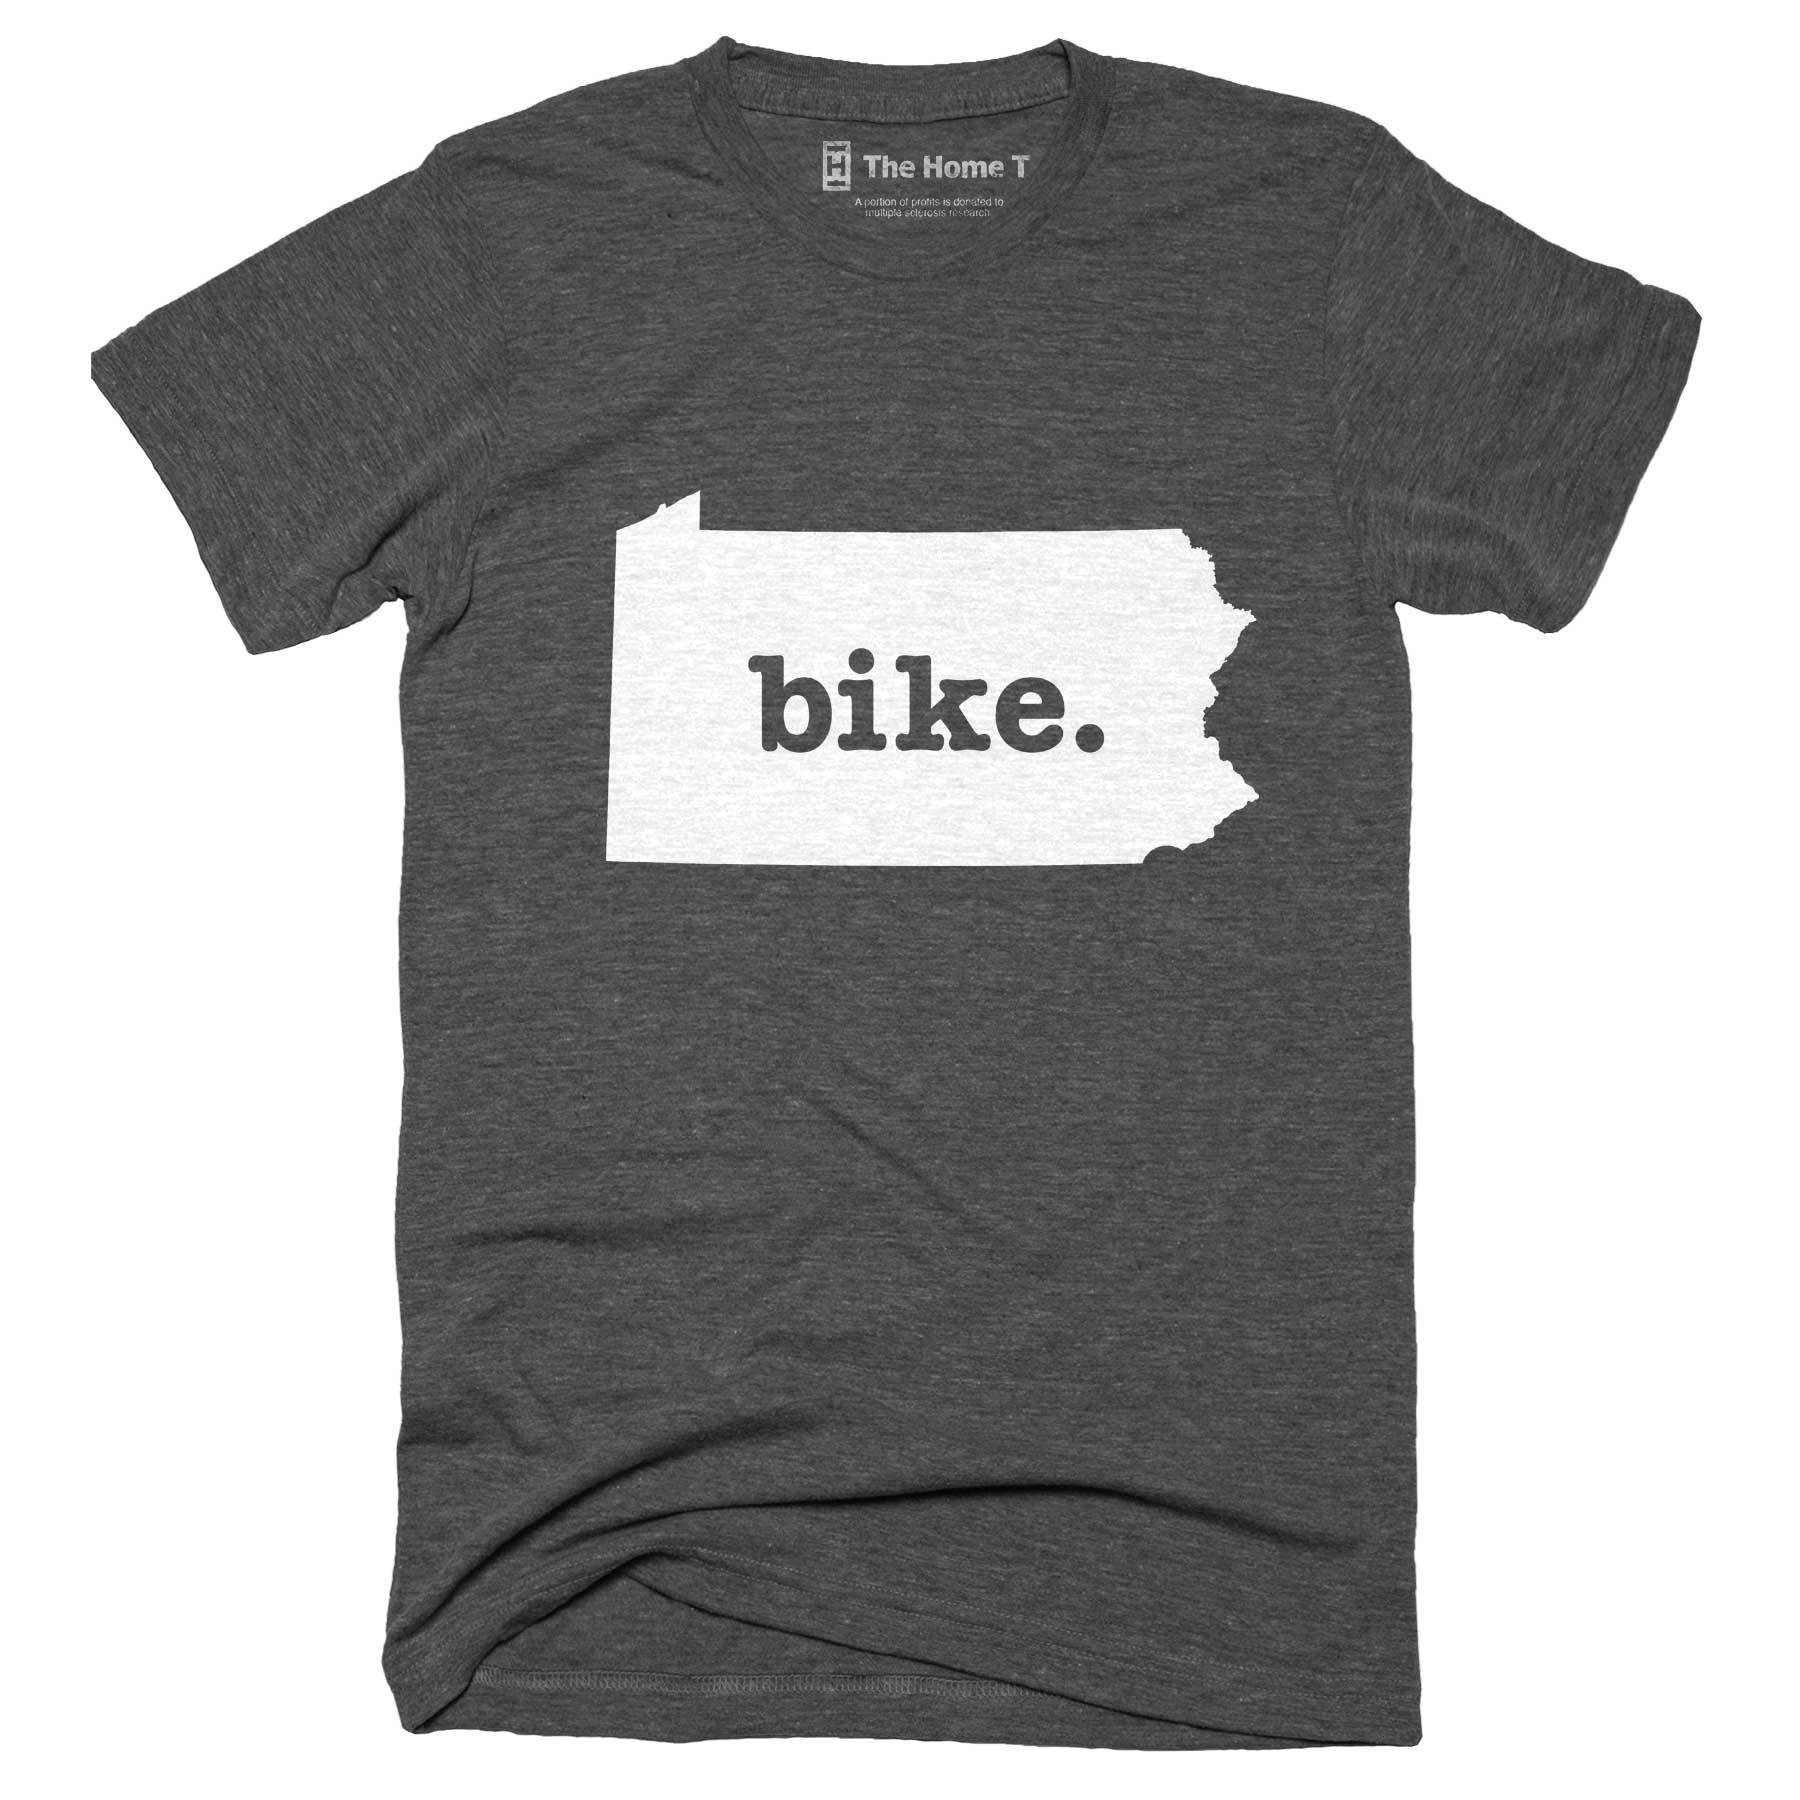 Pennsylvania Bike Home T-Shirt Outdoor Collection The Home T XS Grey